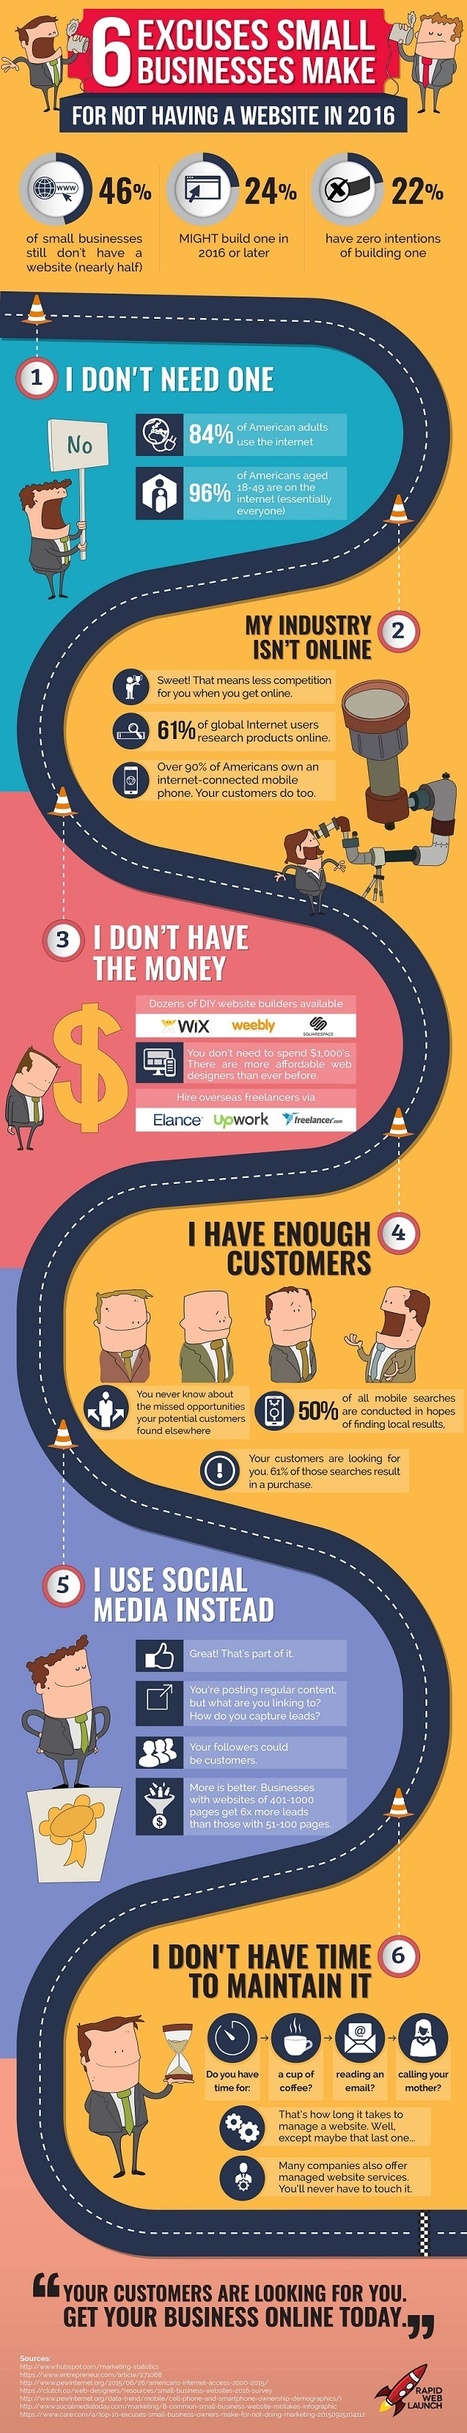 Six Excuses Small Businesses Make for Not Having a Website #Infographic | MobileWeb | Scoop.it